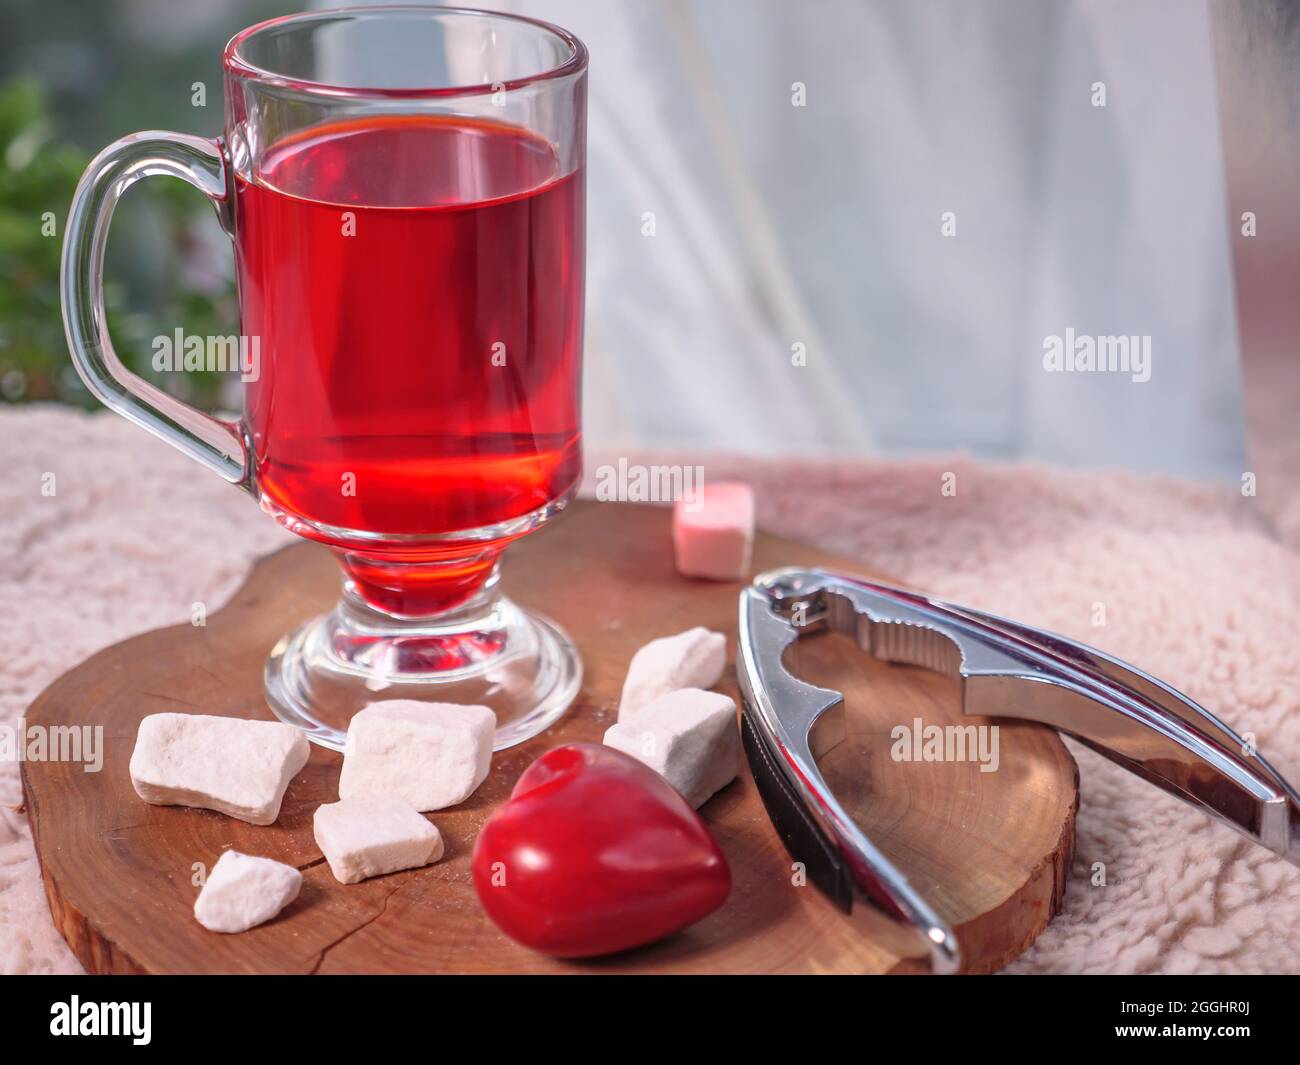 A glass of red berry tea and hazelnuts with nutcracker lying on a wooden board on a cozy orange warm cloth. Window with curtain lace at the background Stock Photo